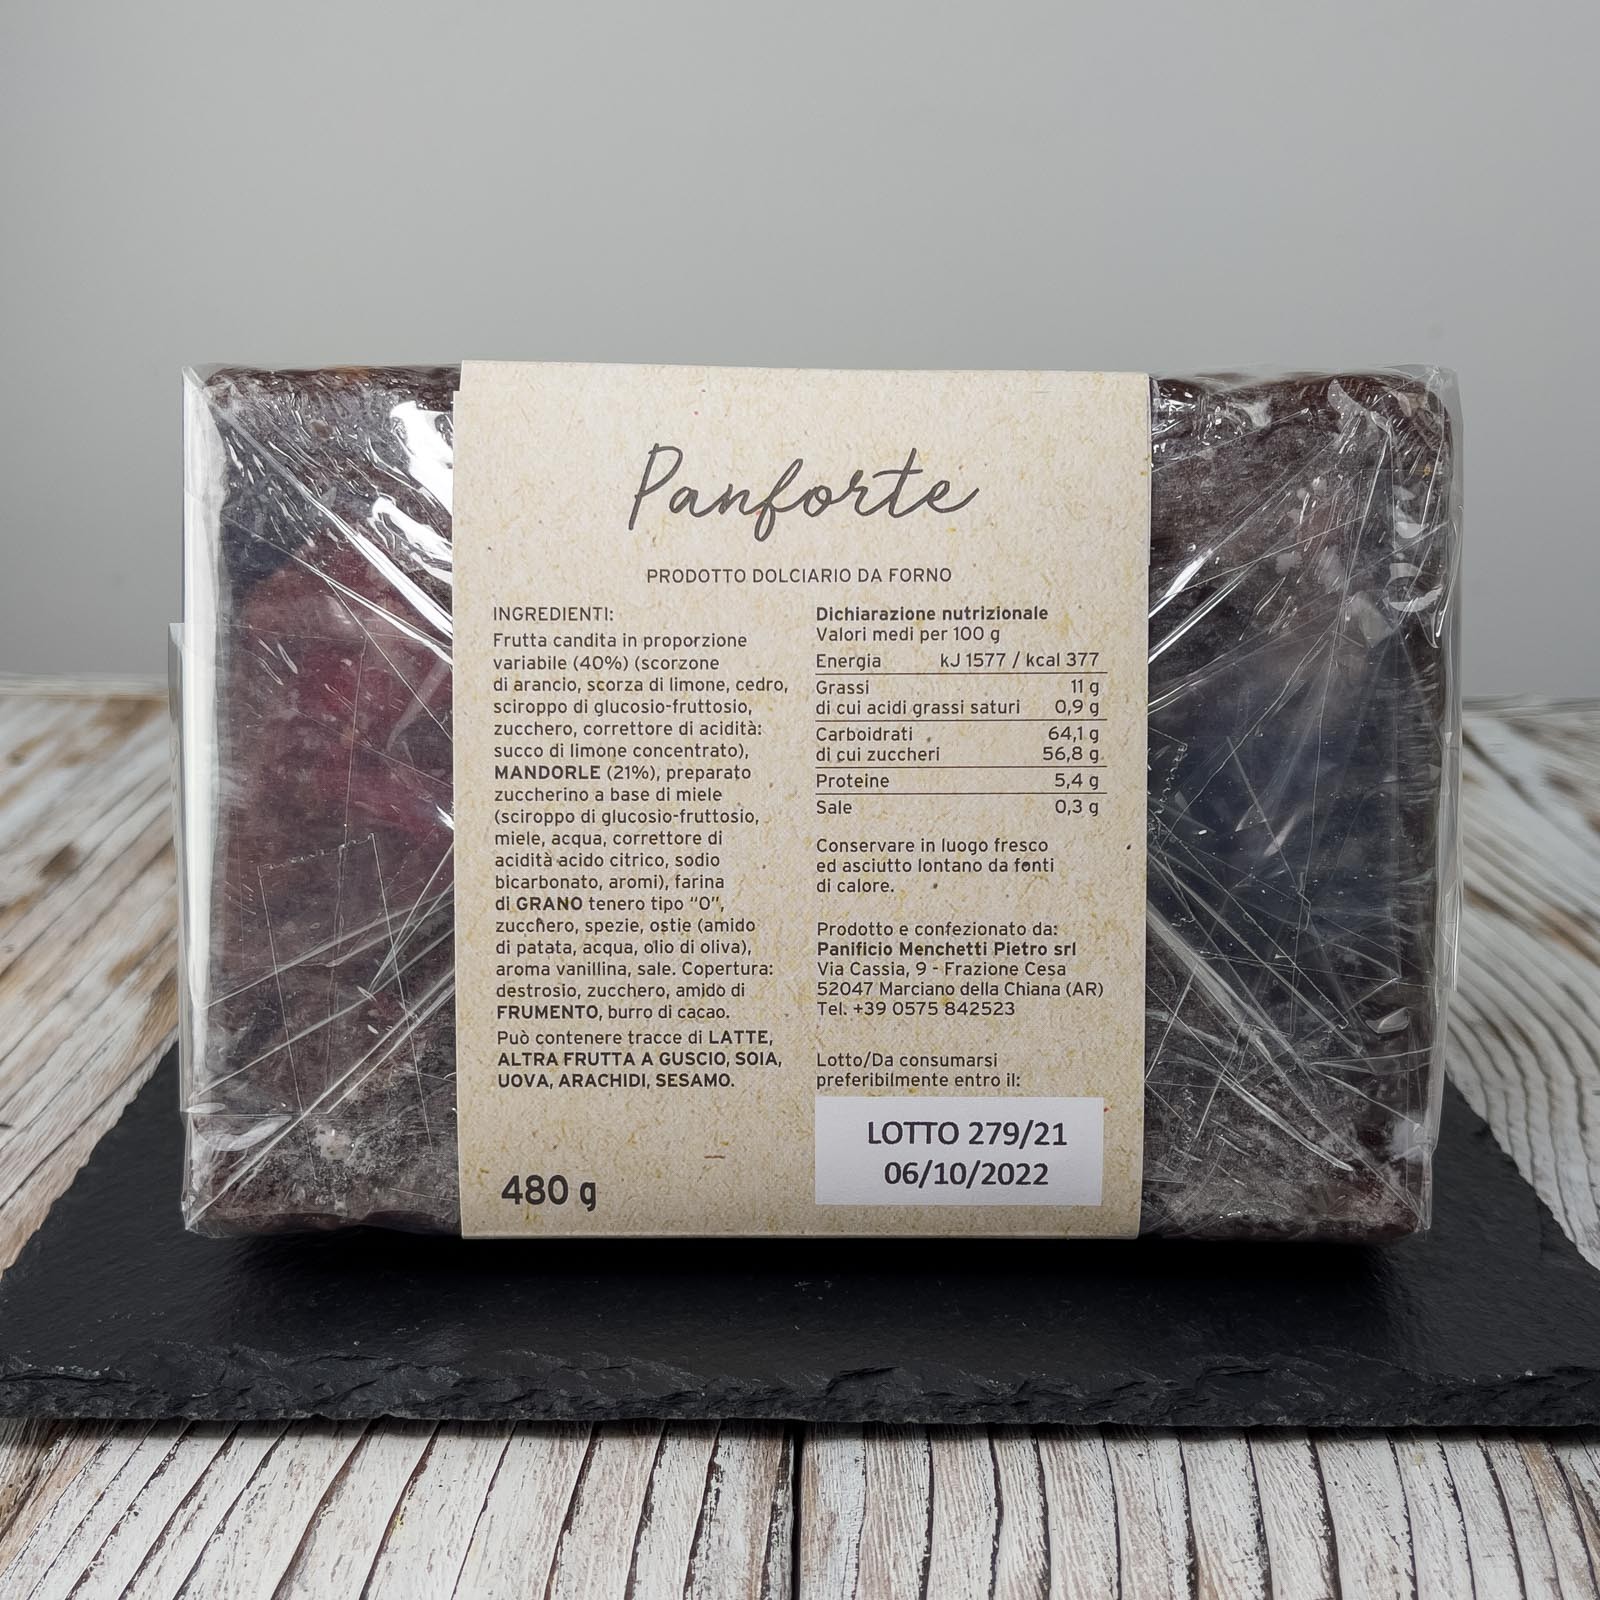 Tuscan “Panforte” with almonds and candied fruit is the typical Christmas dessert, but in reality the enveloping flavor of spices and candied citrus fruits is appreciated all year round.